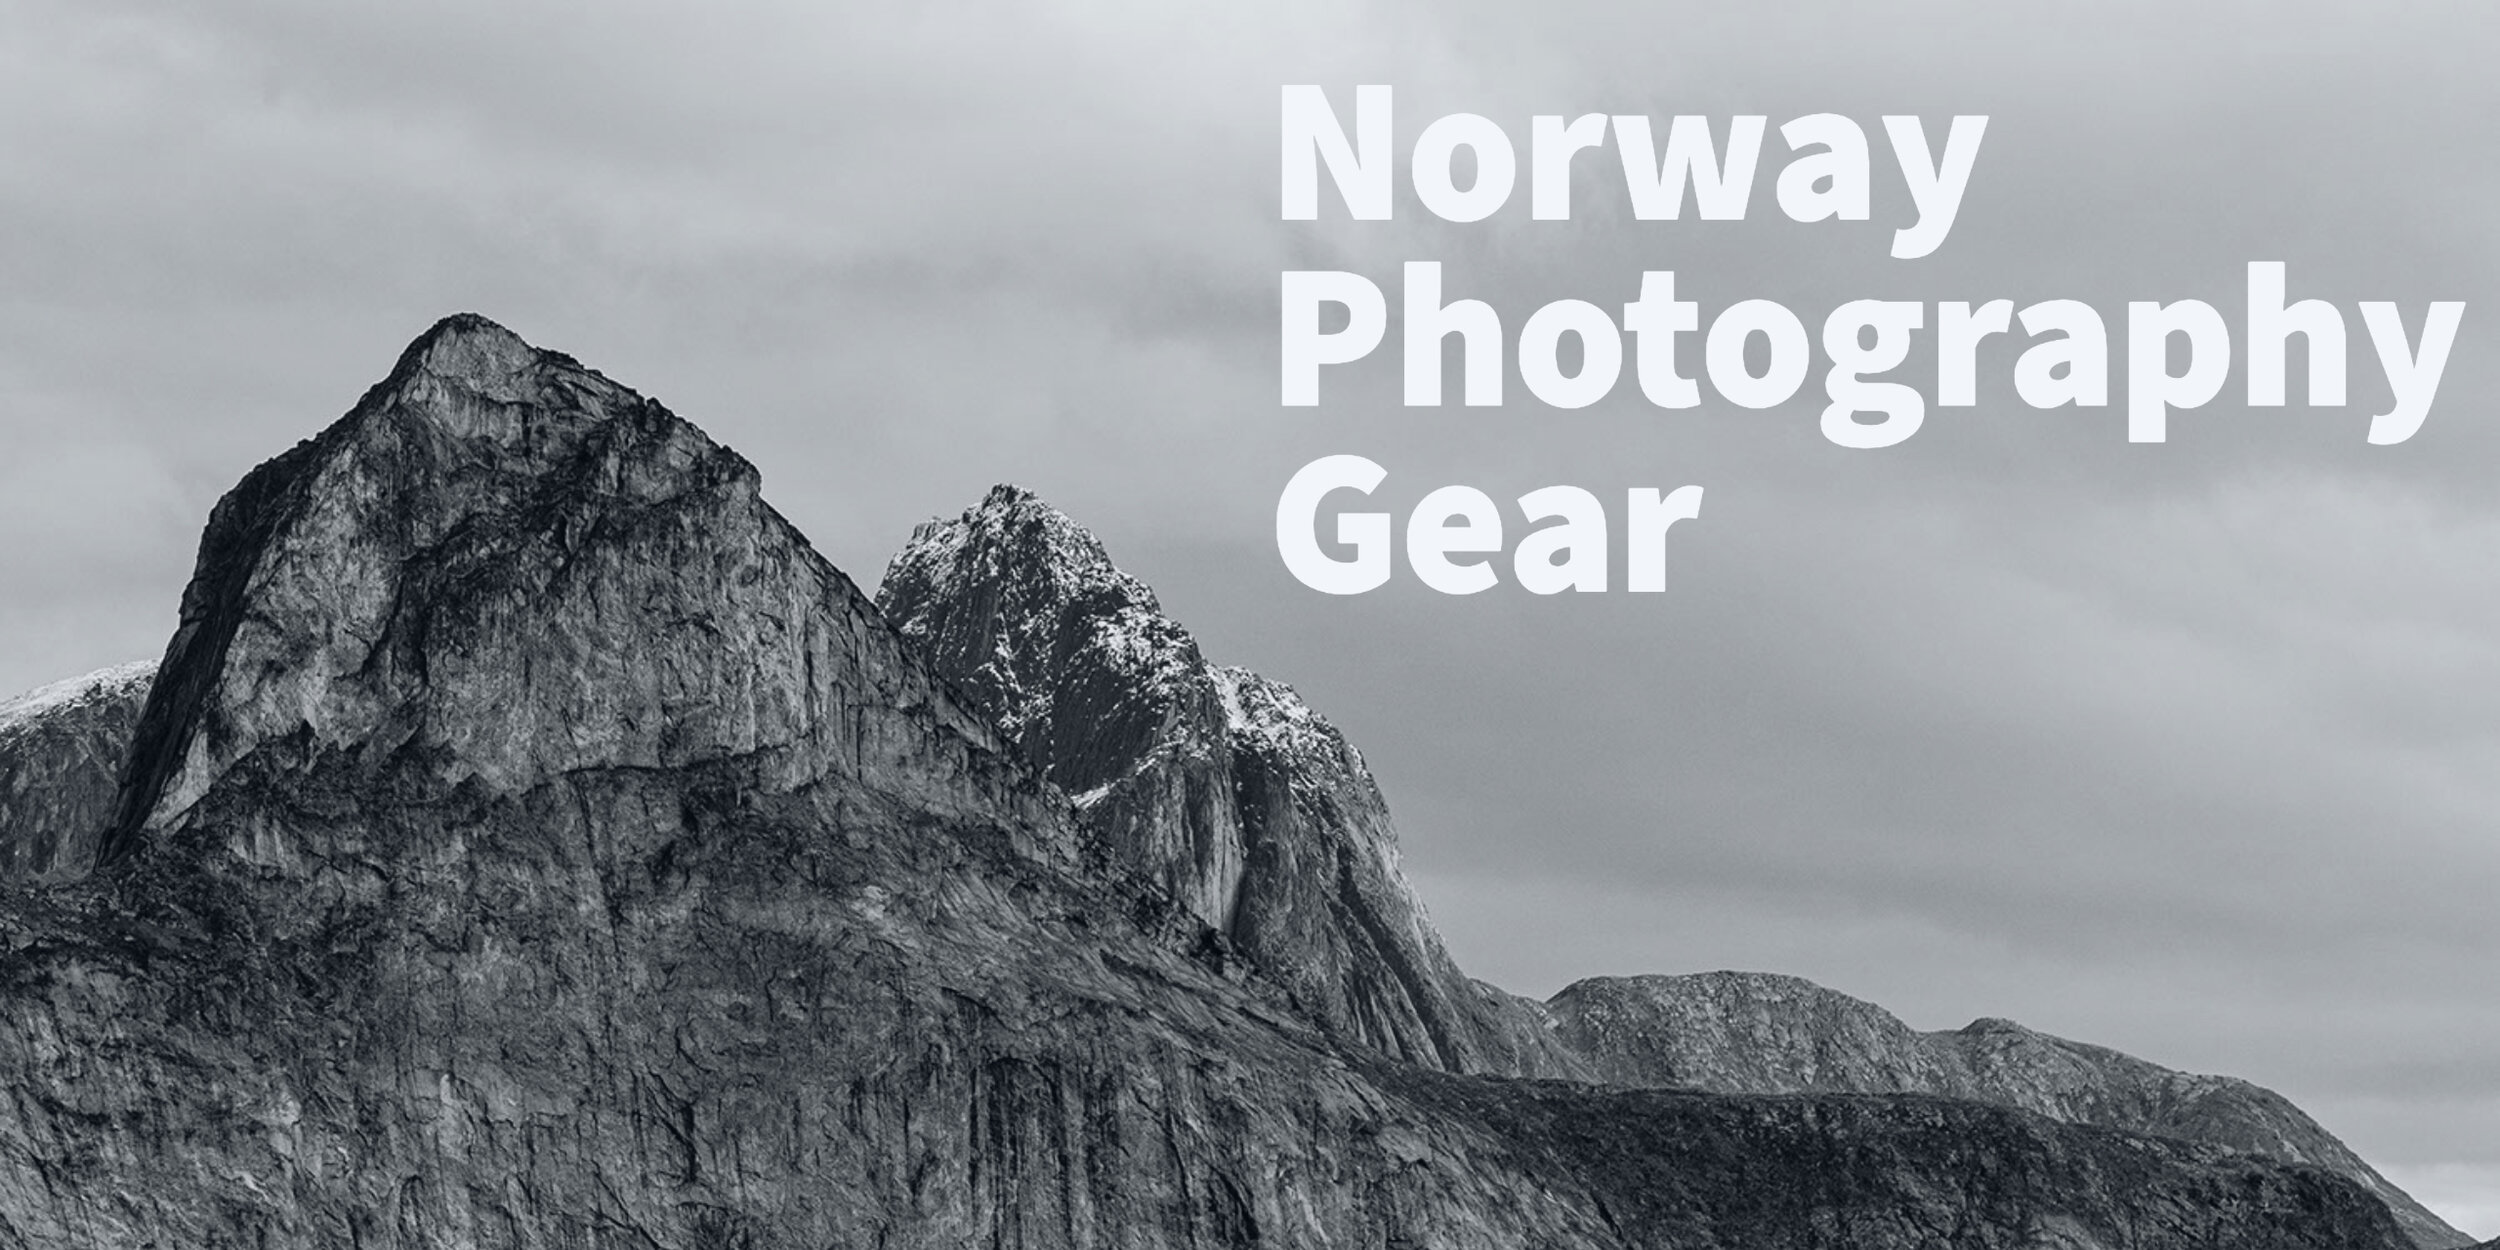 Evaluating the photography gear for my trip to Norway